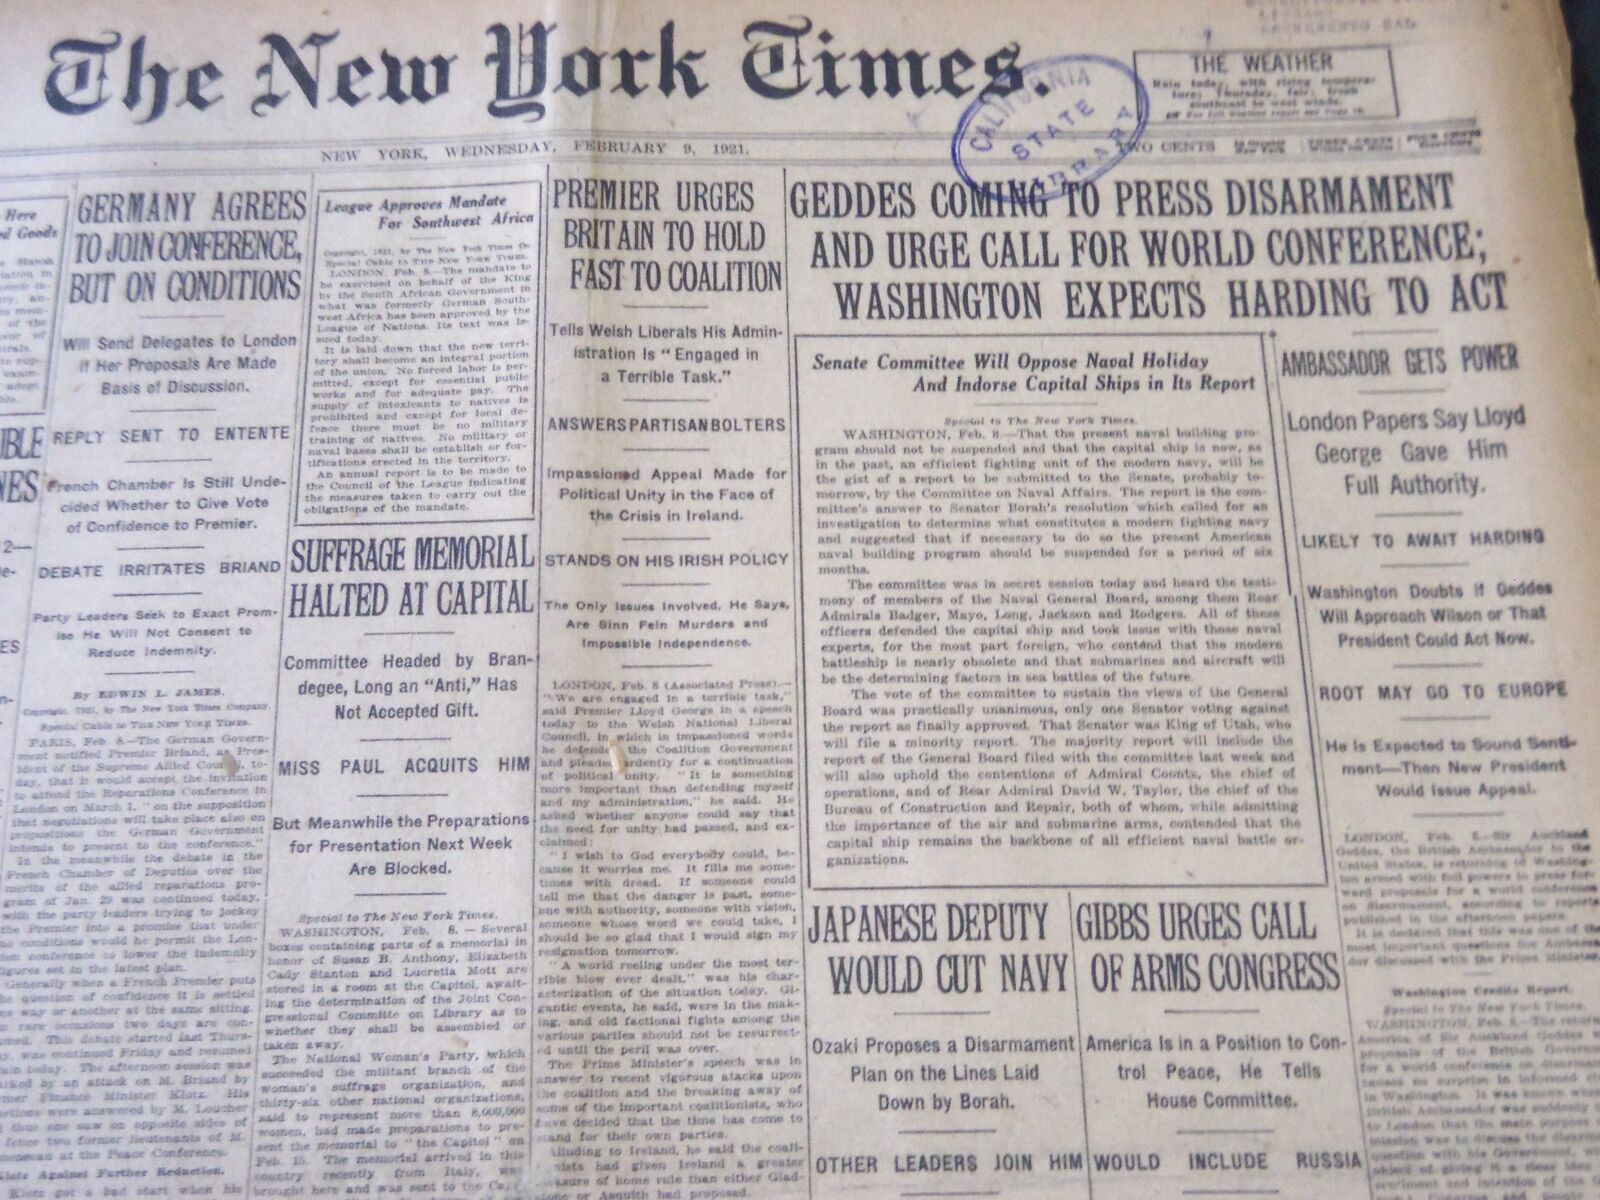 1921 FEBRUARY 9 NEW YORK TIMES - GEDDES COMING TO PRESS DISARMAMENT - NT 5465